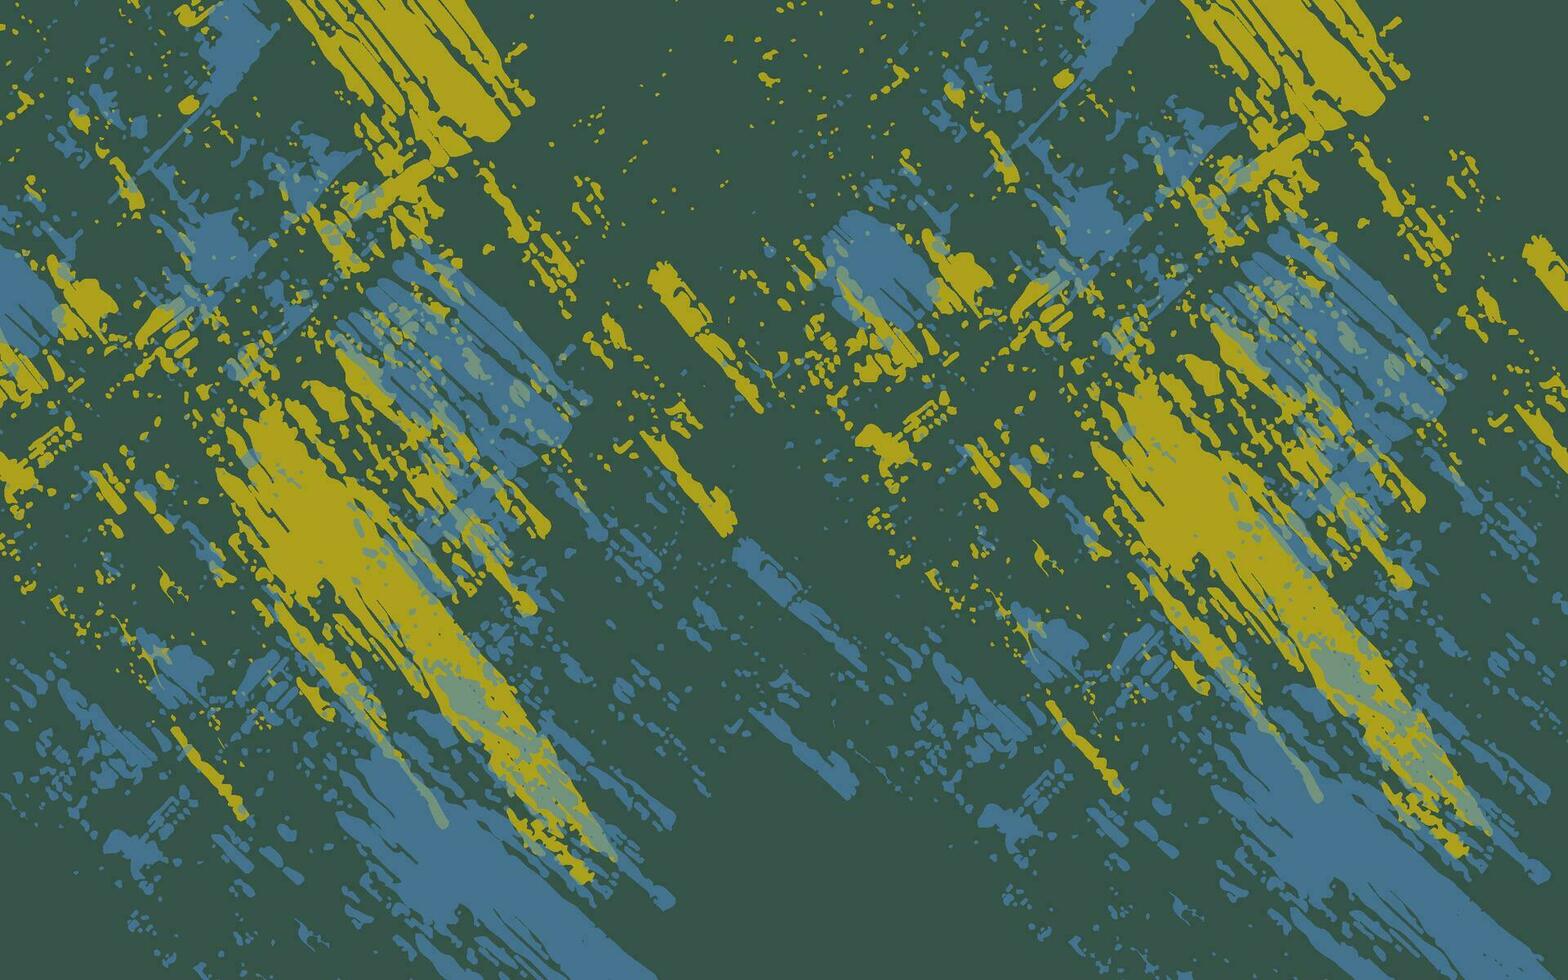 Abstract grunge texture splash paint green and yellow background vector